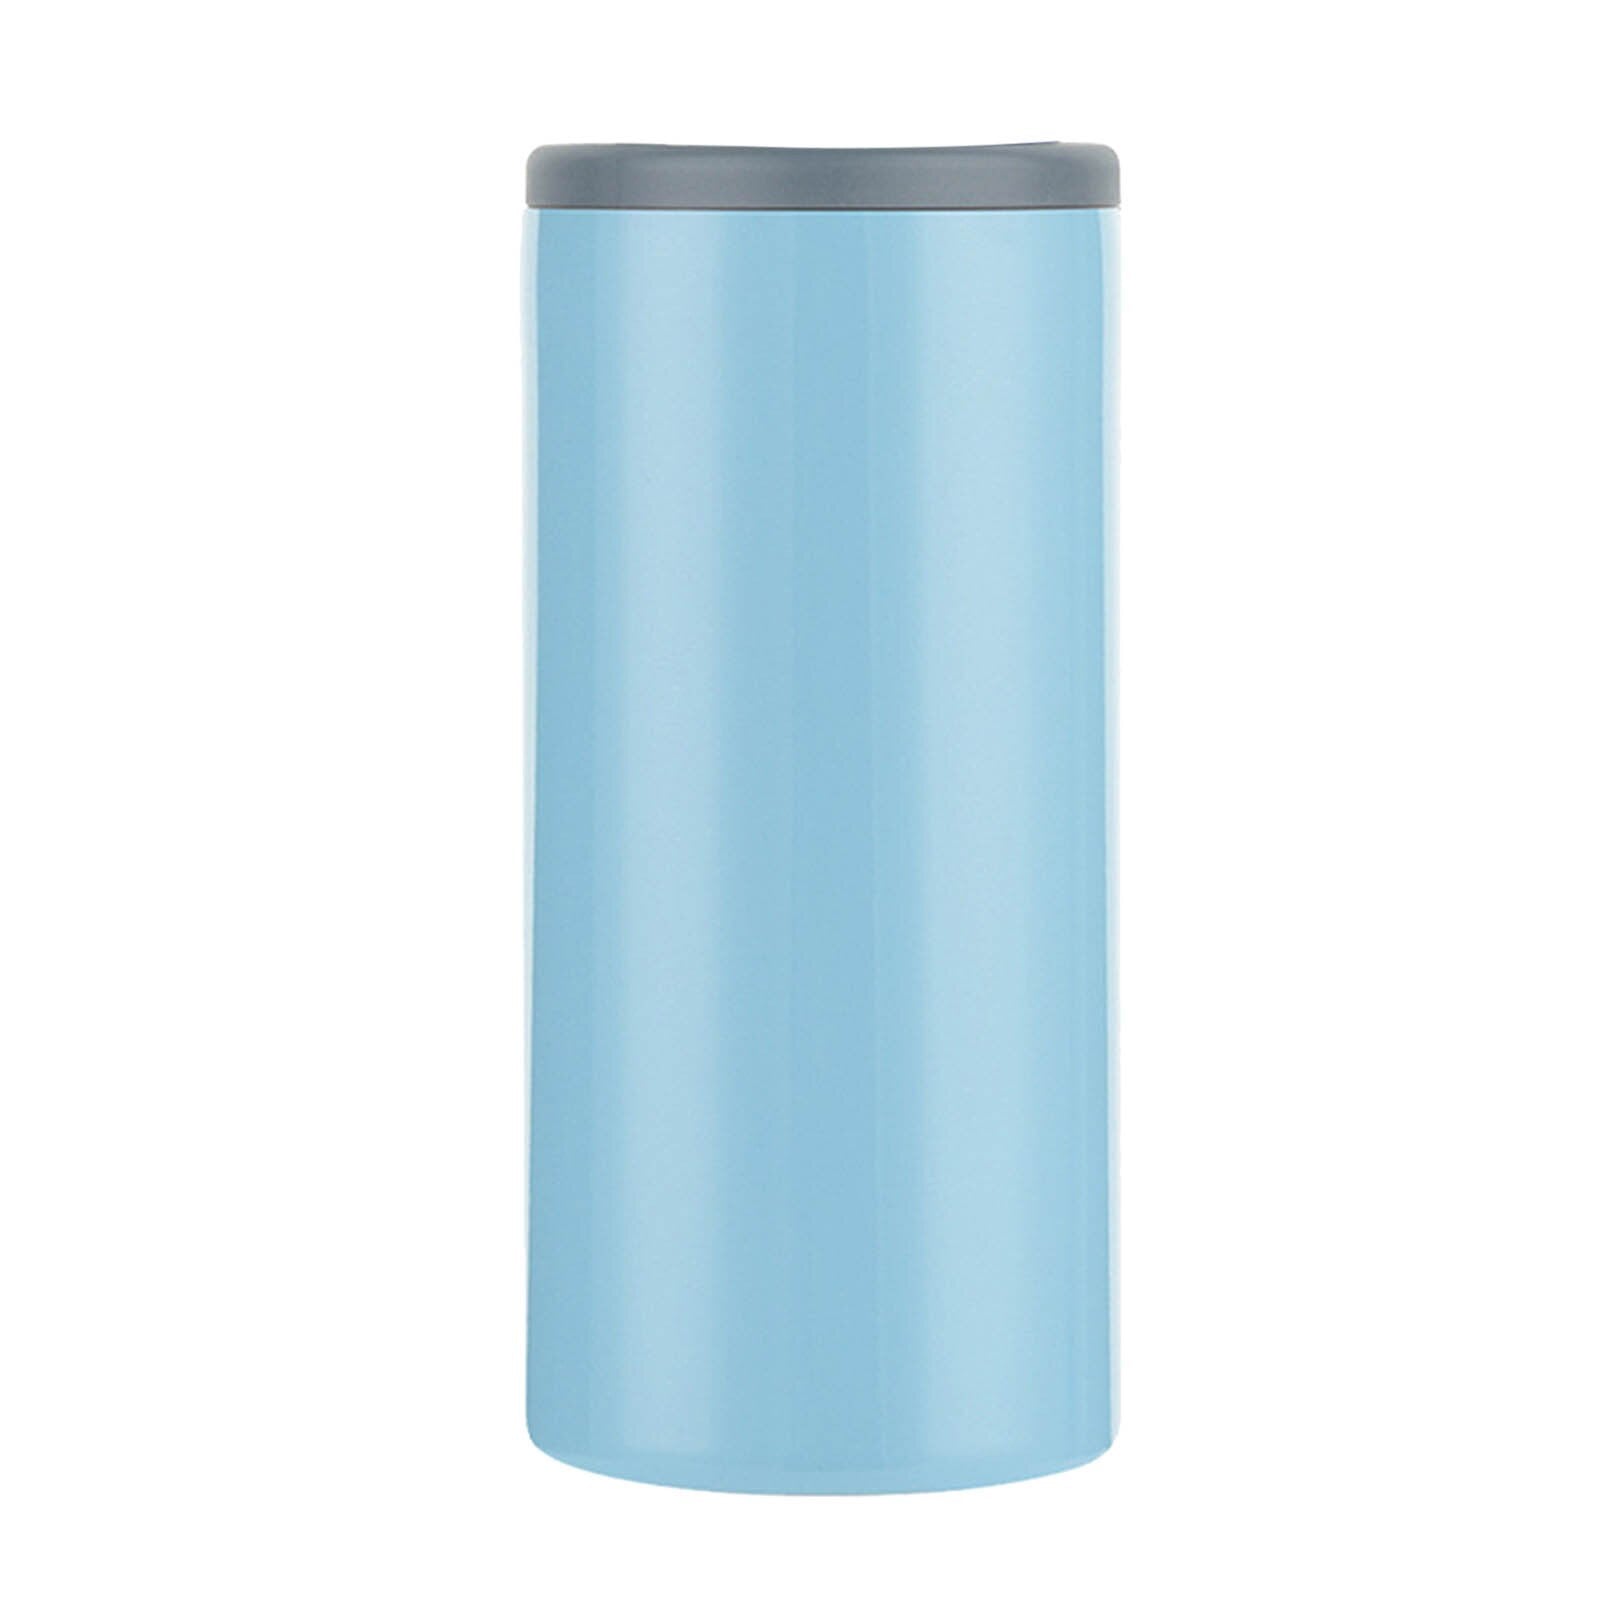 Stainless Steel Can Cooler - Light blue Find Epic Store